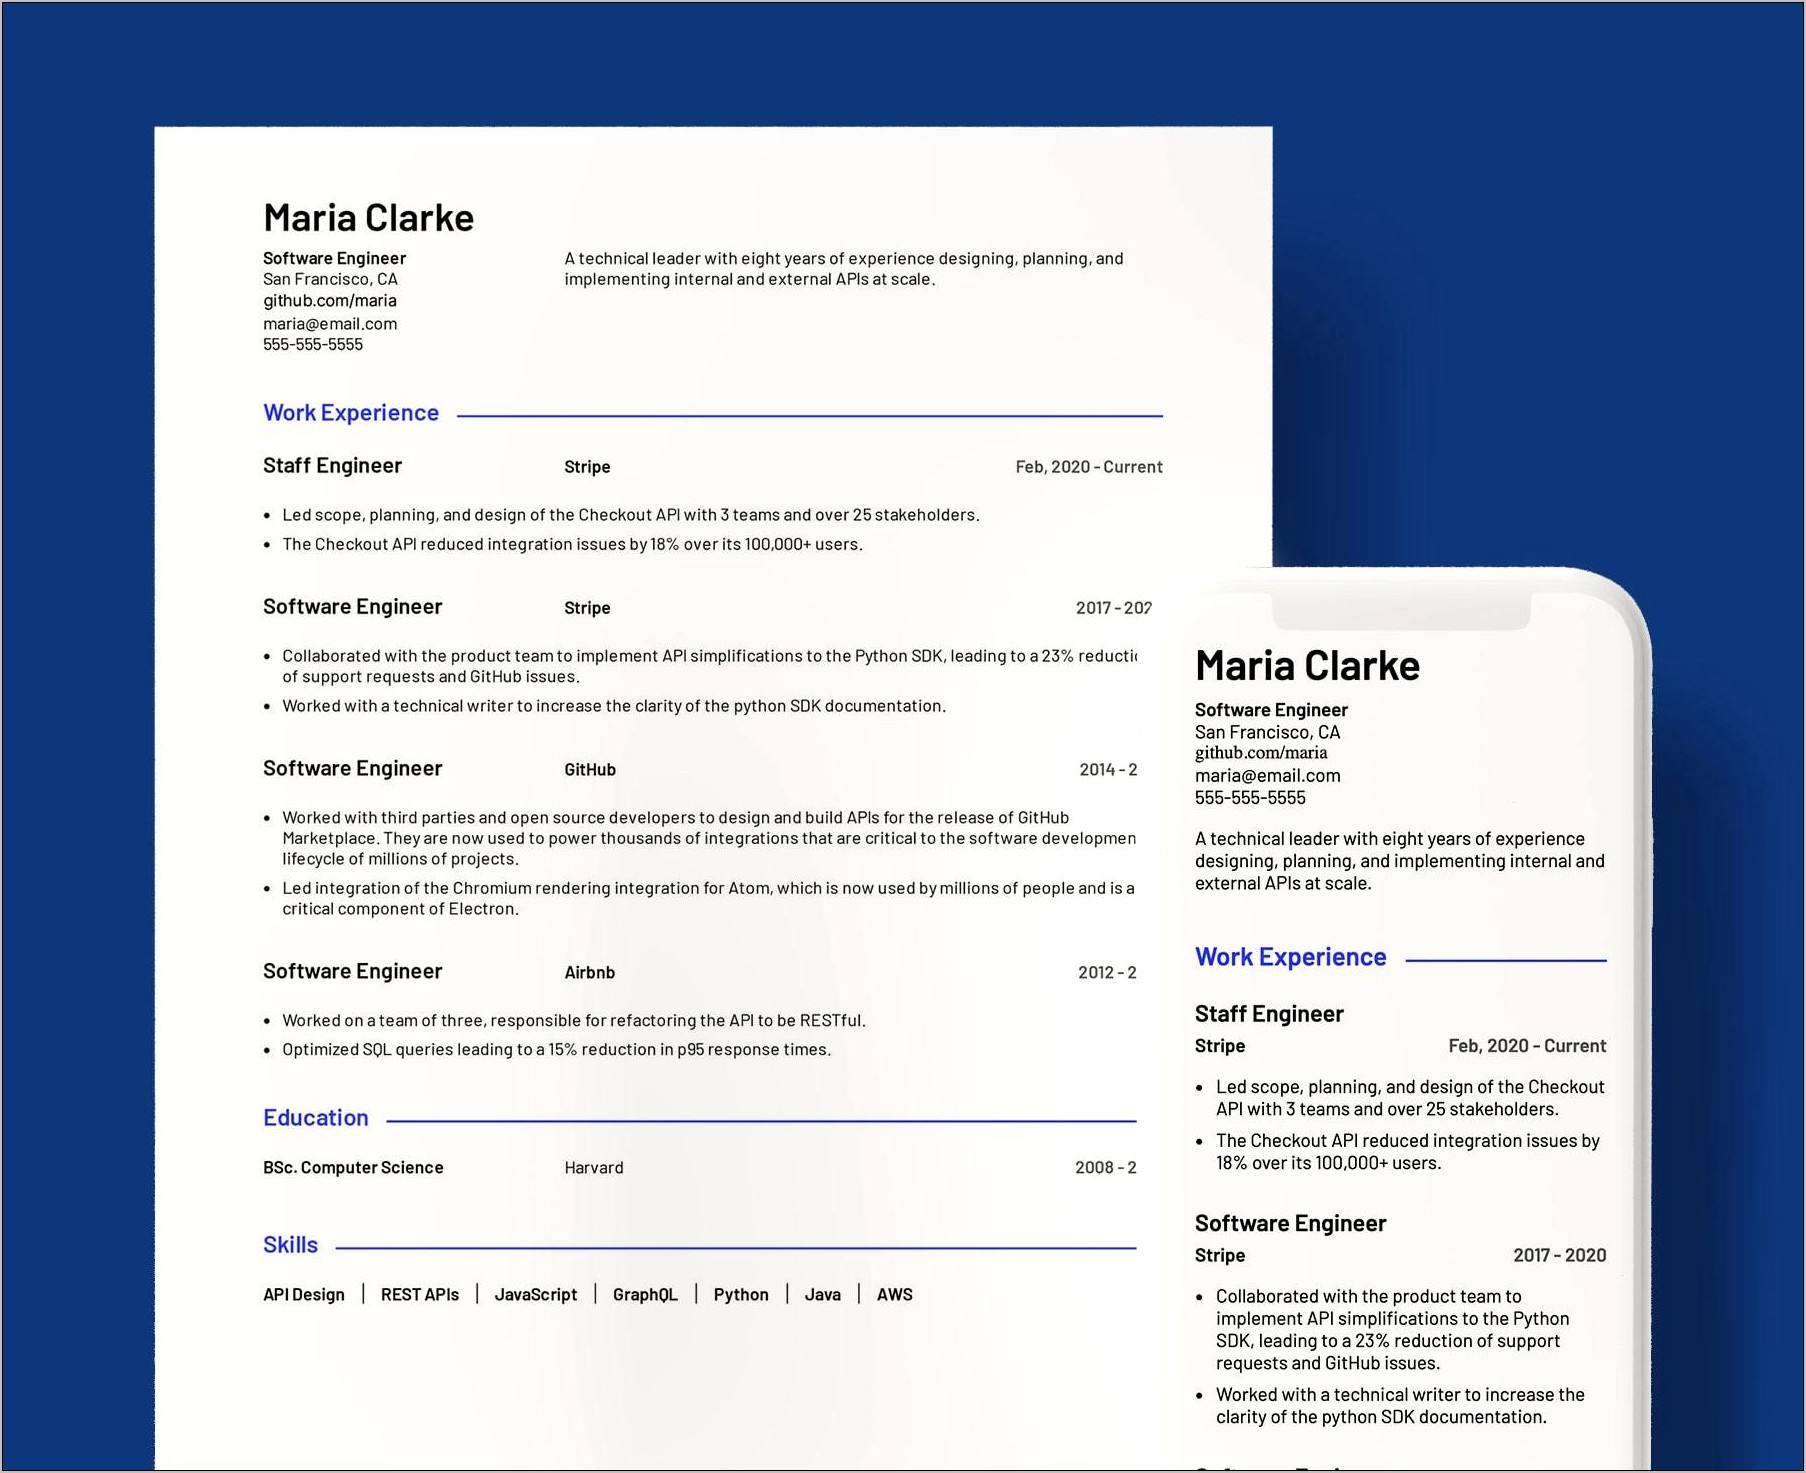 Technical Support Manager Resume Template